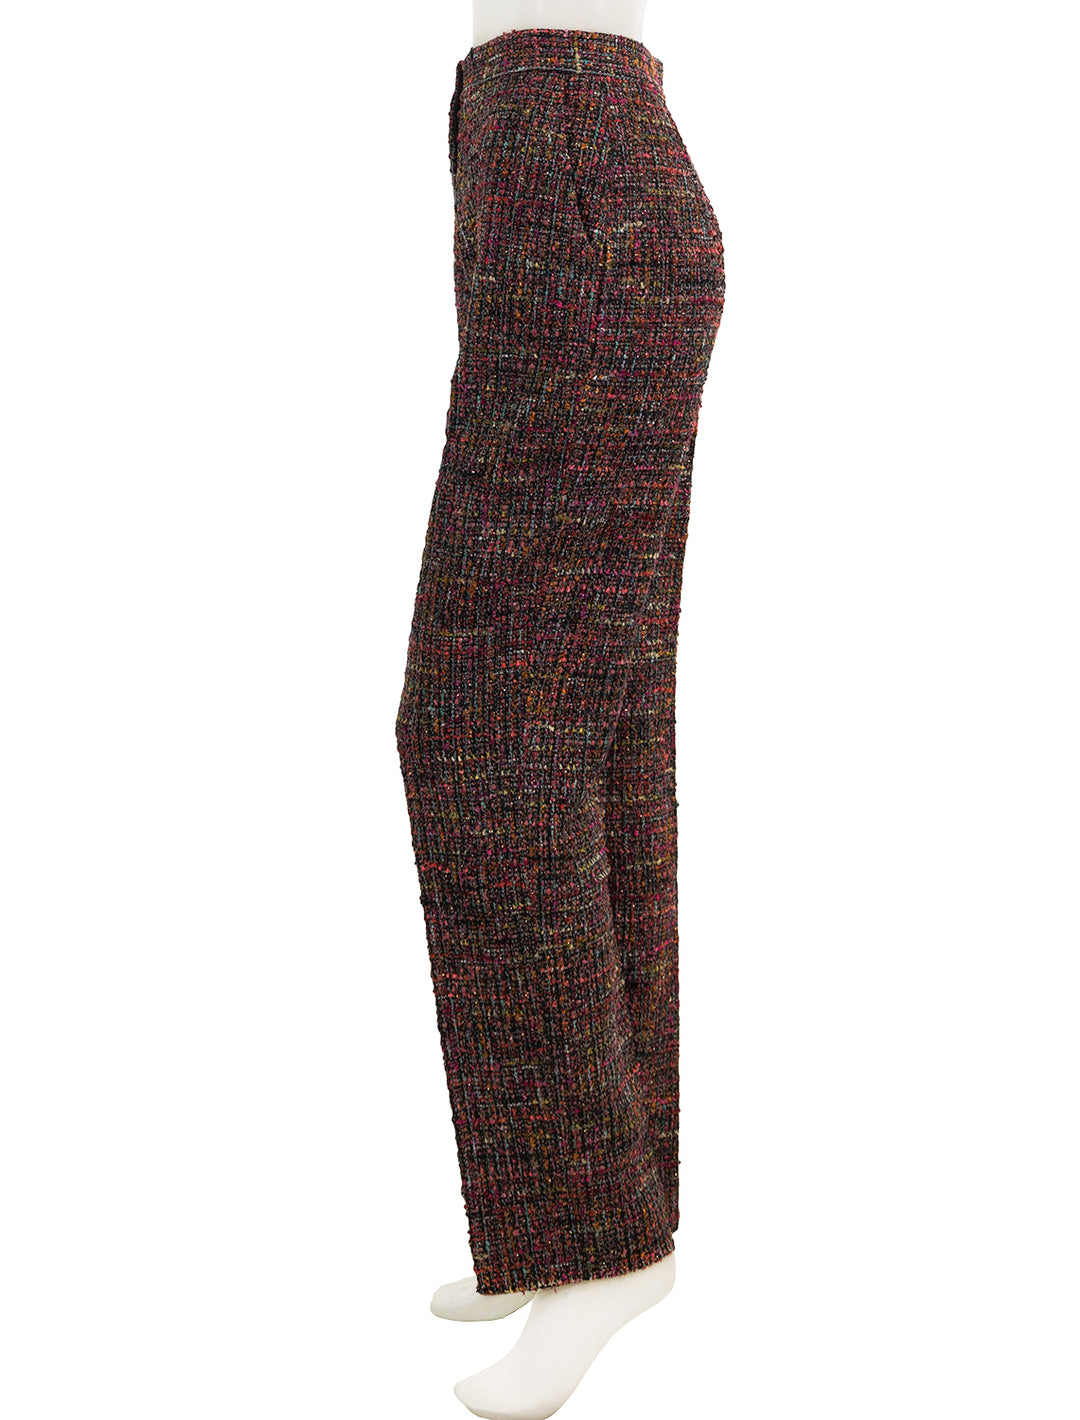 Side view of Saloni's Maxima Trouser in Motley Tweed.